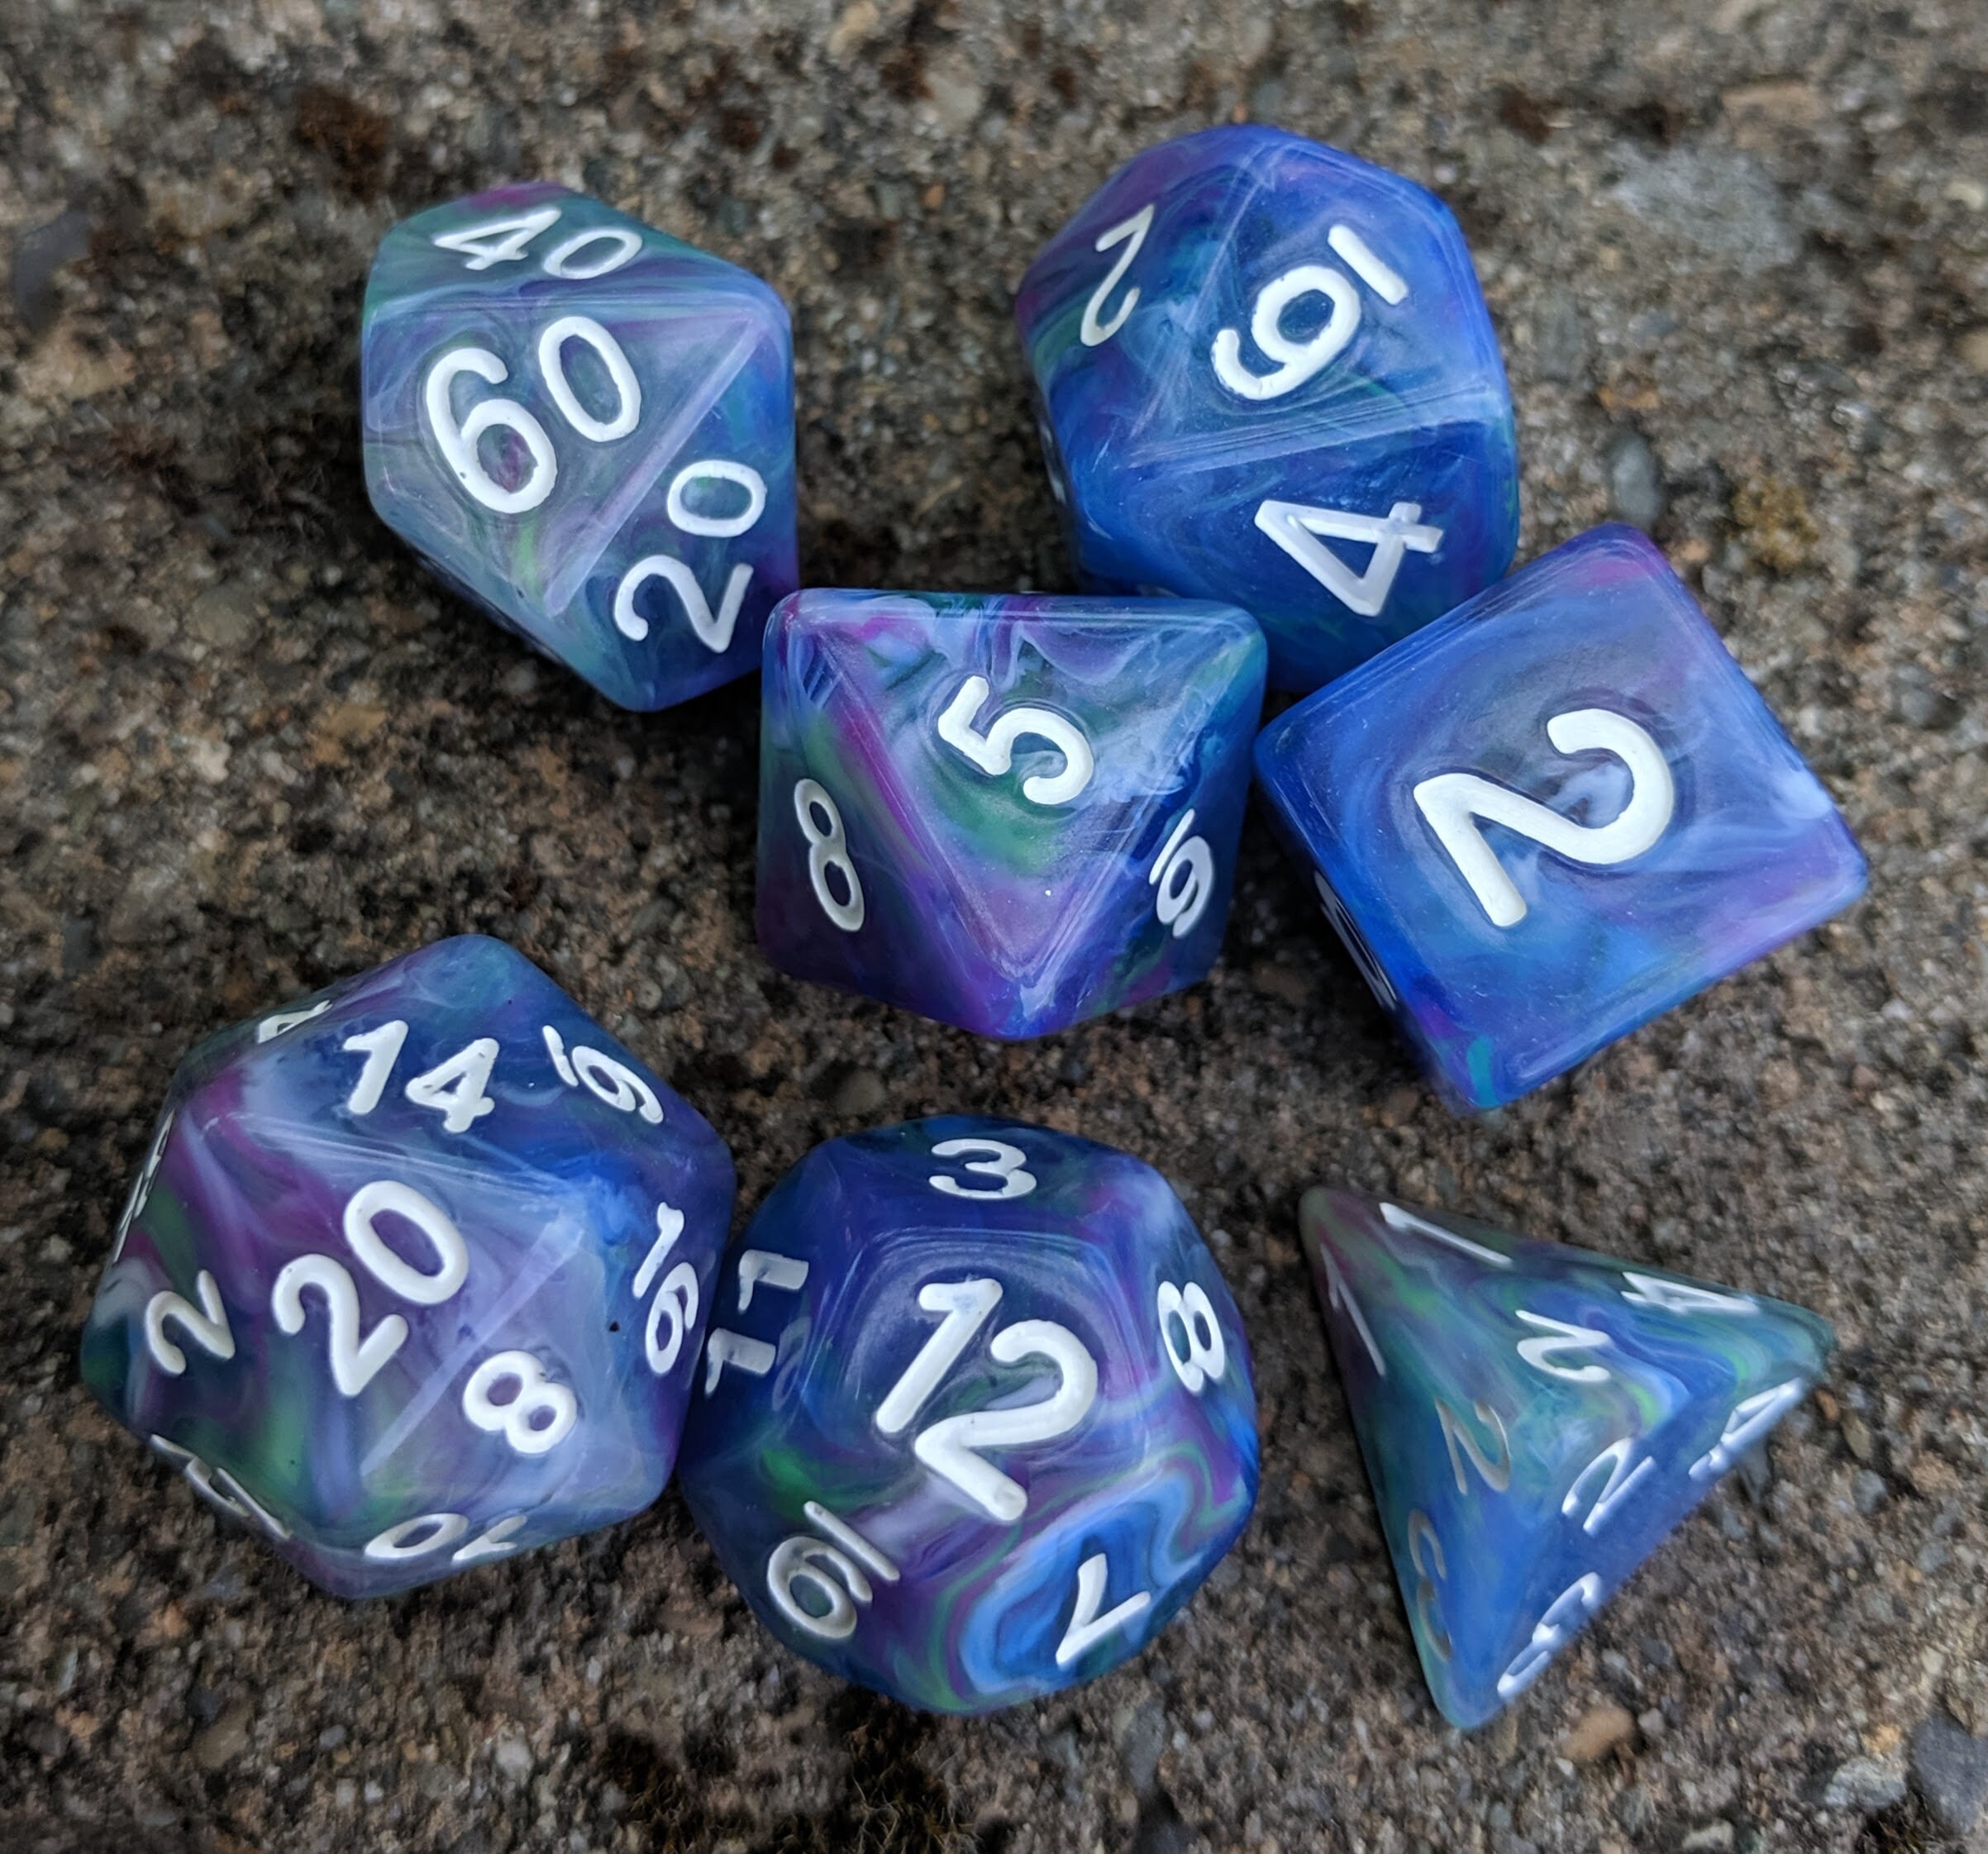 Dice DND Dice Set RPG Glitter Dice Fit Dungeons and Dragons D&D Pathfinder MTG Role Playing Games Polyhedral Dice Transparent Dice with Purple & Blue Swirls 